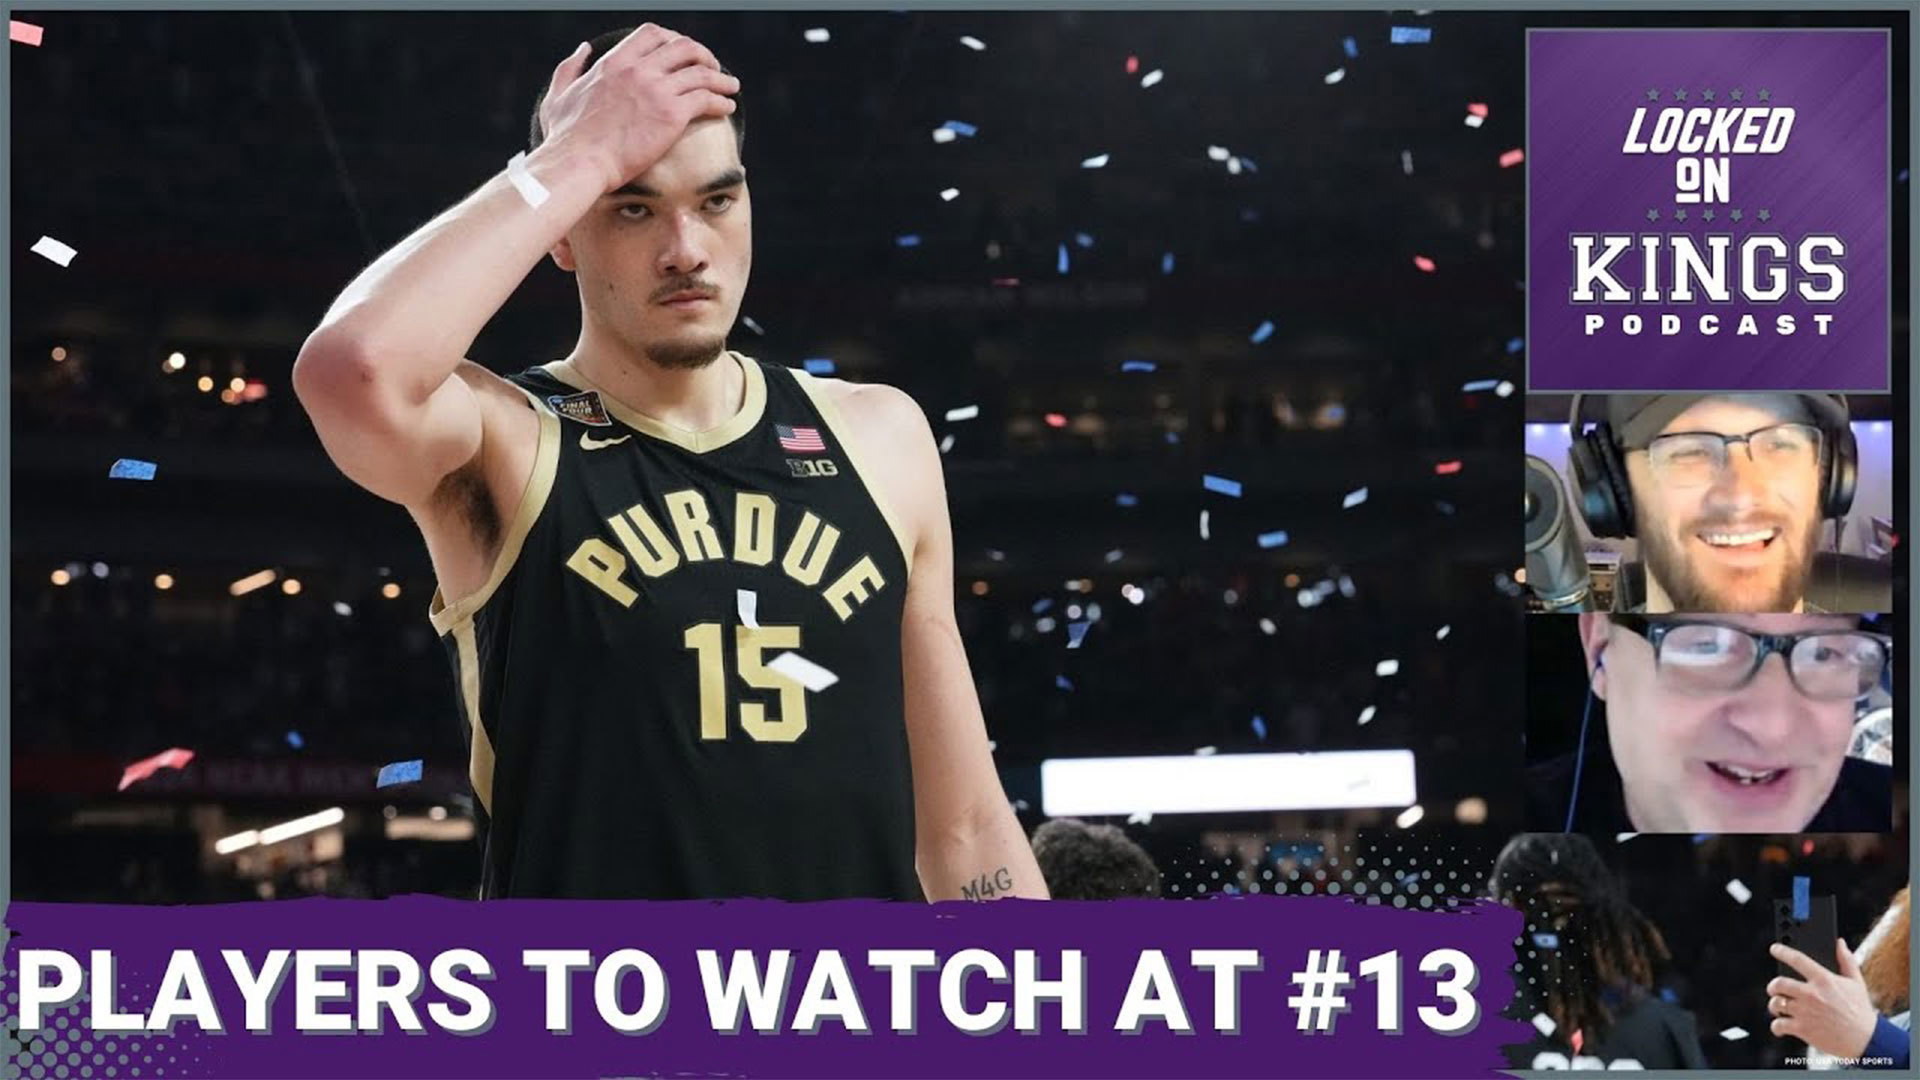 Matt George is joined by NBA Draft analyst and founder of Hoop Obsession, Bobby Gerould, who lists four names the Kings should consider drafting with the 13th overal